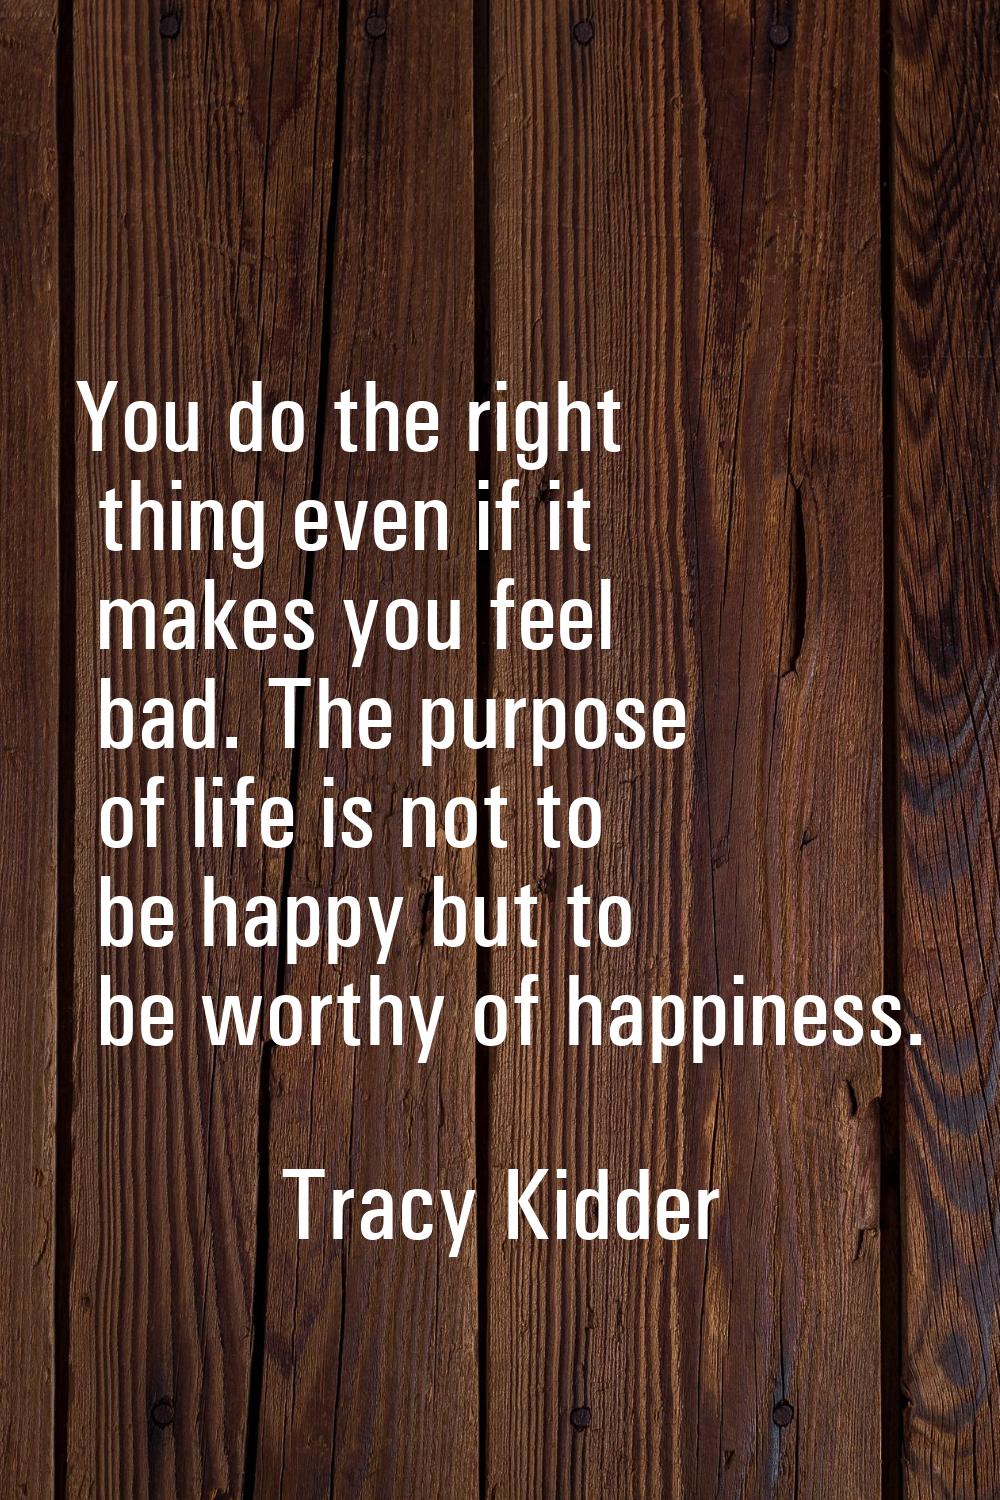 You do the right thing even if it makes you feel bad. The purpose of life is not to be happy but to